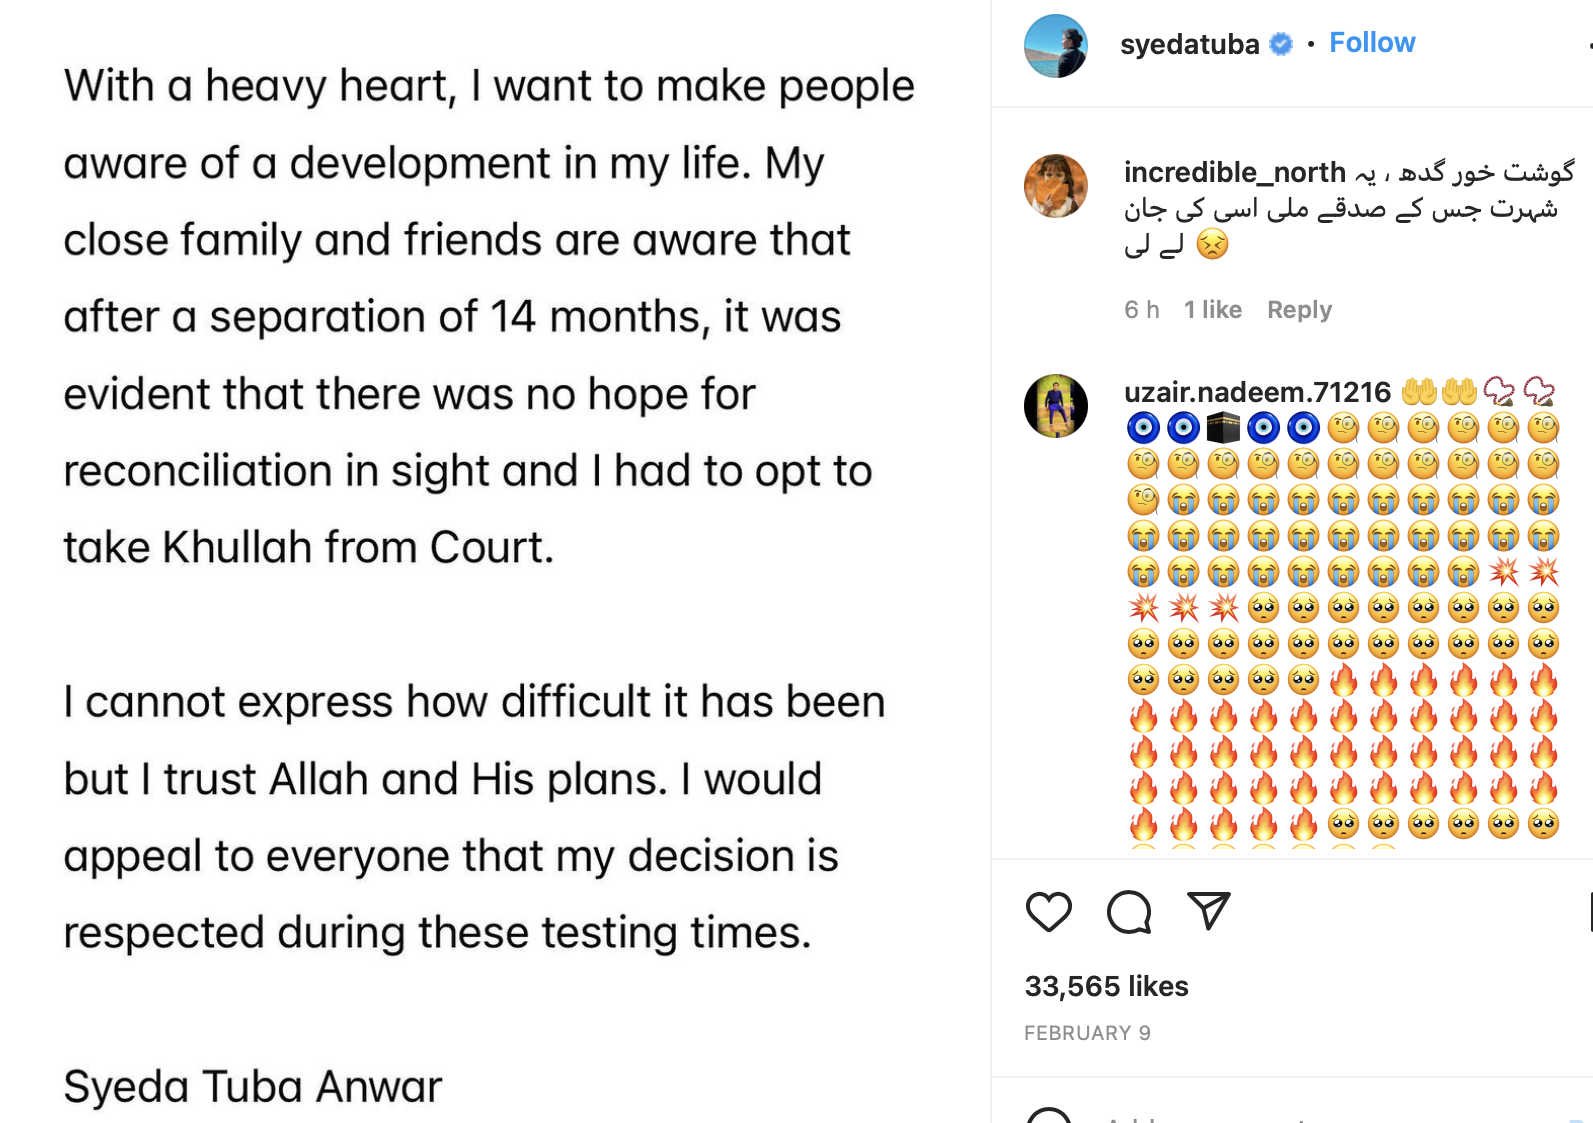 Aamir's Second wife posted on her Instagram about her separaation with Aamir Liaquat Hussain